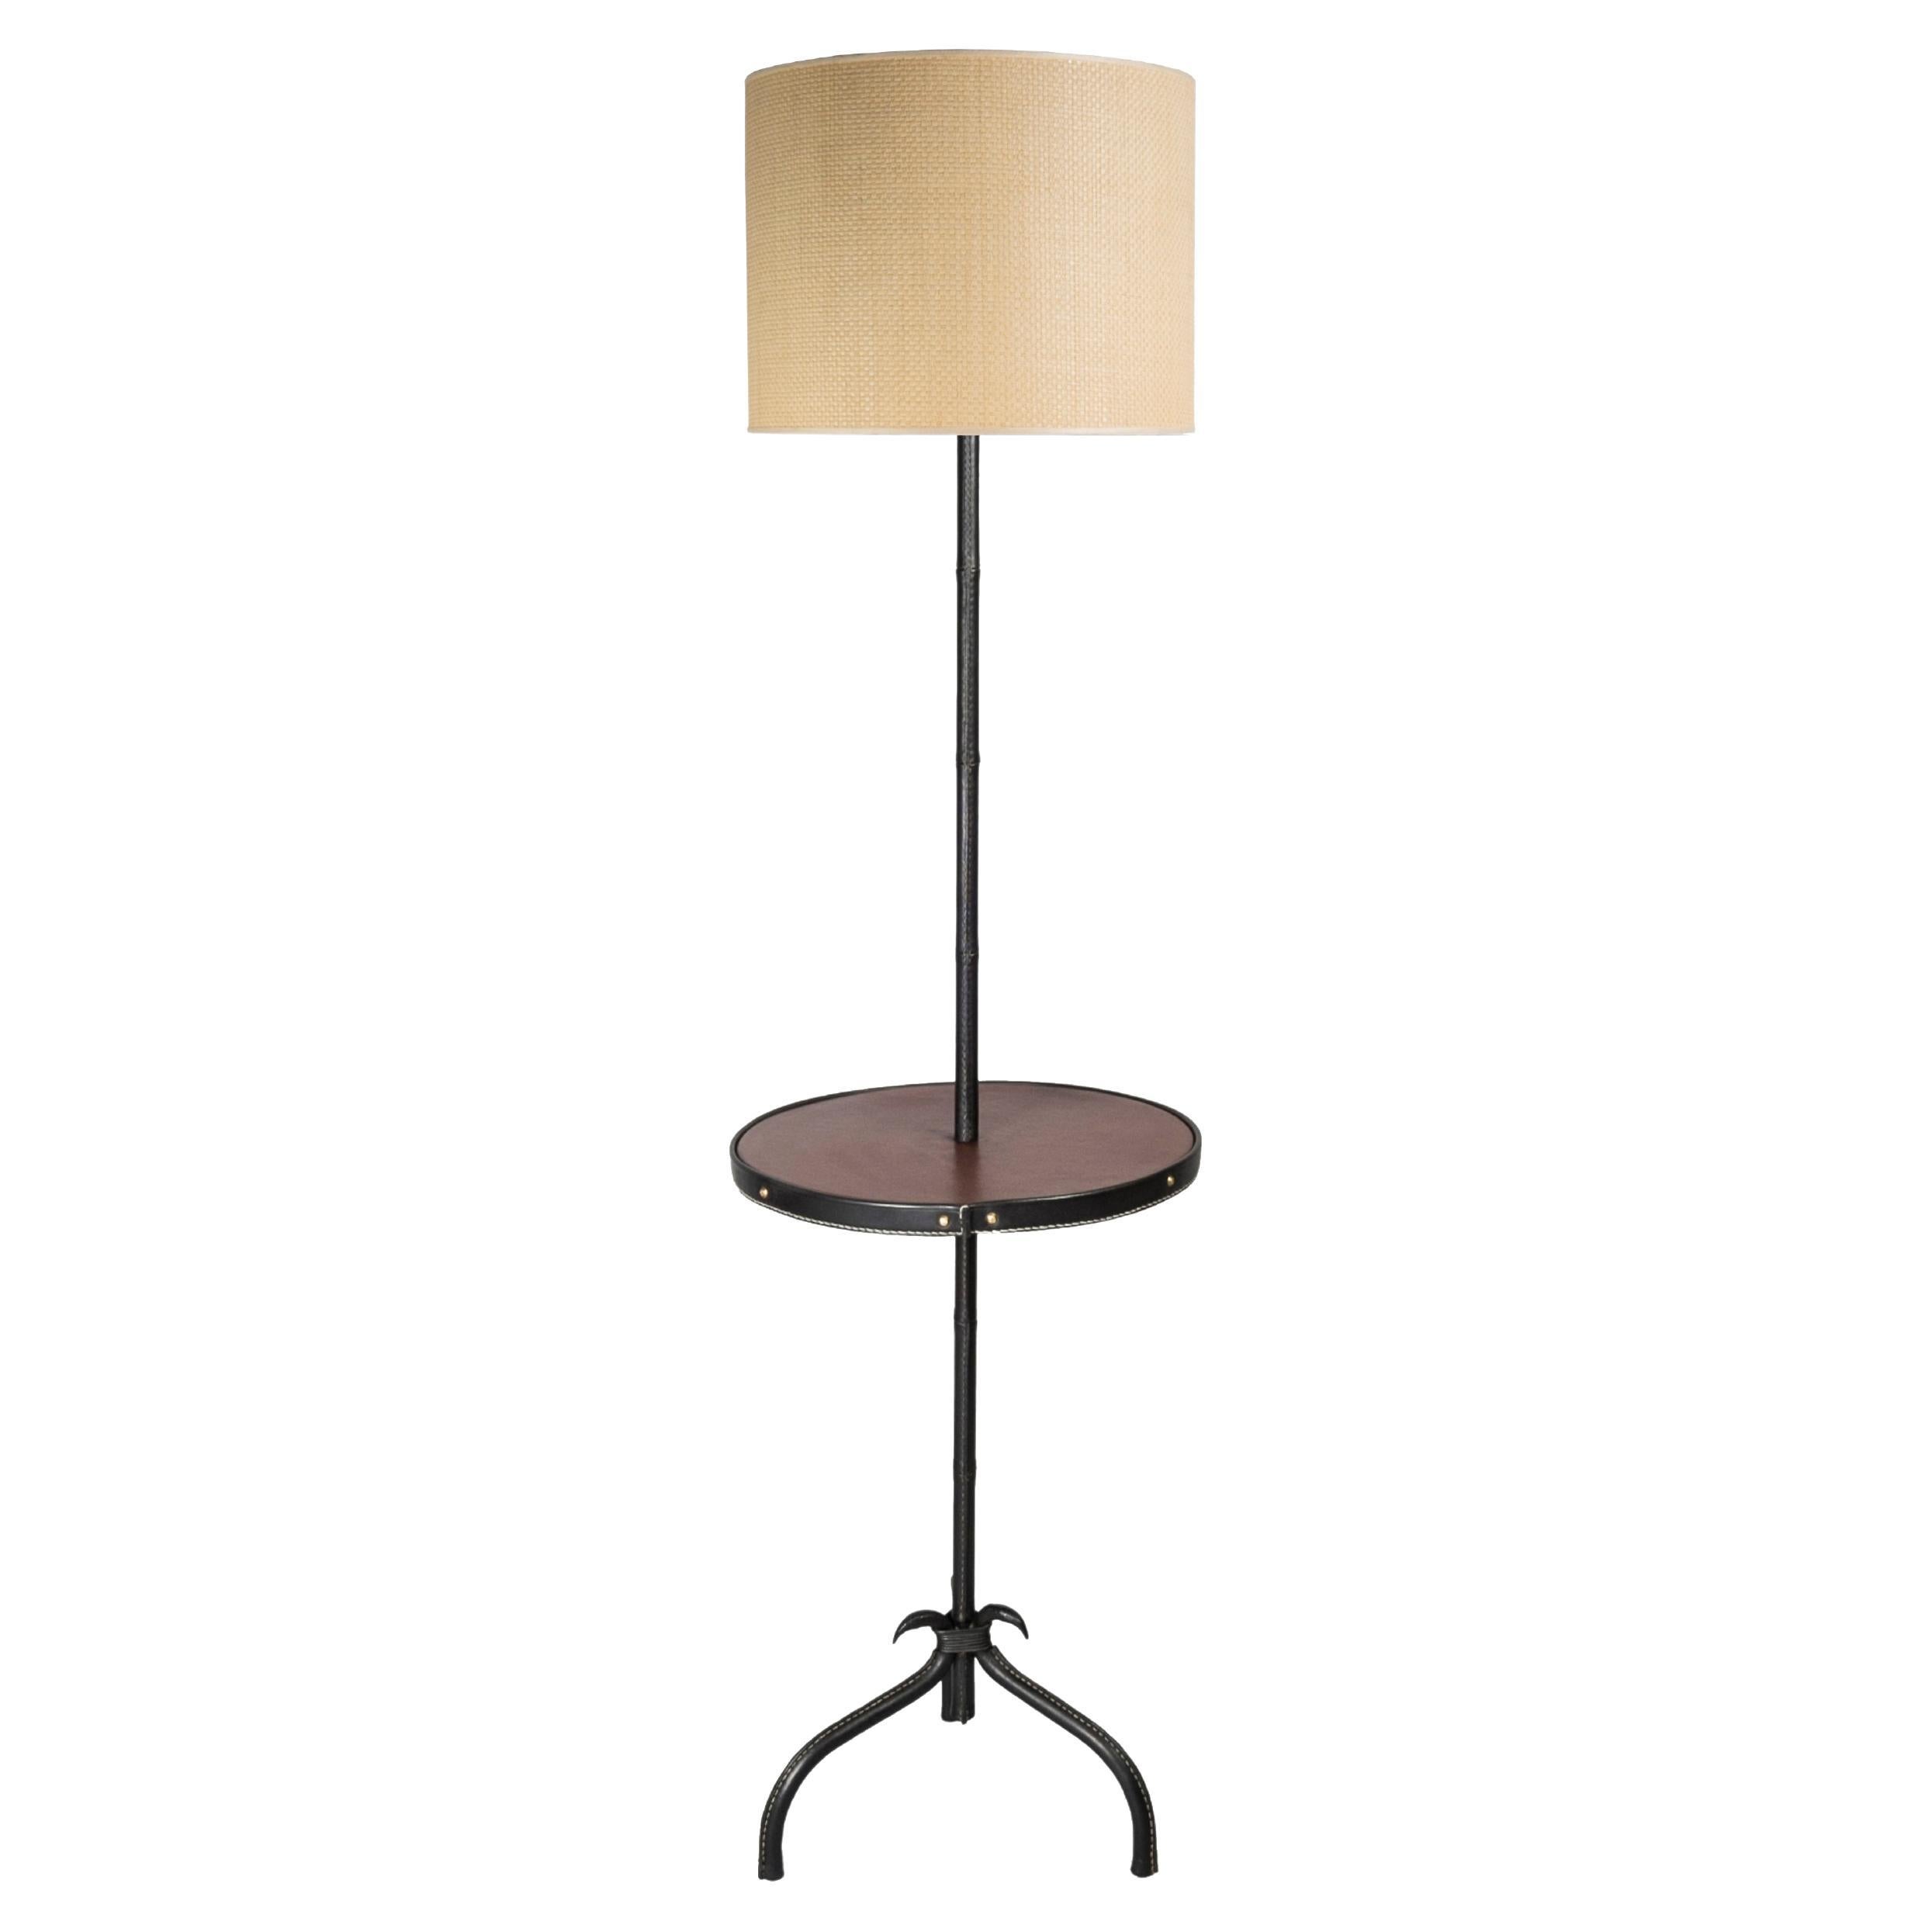 1050's Stitched Leather Floor Lamp by Jacques Adnet For Sale